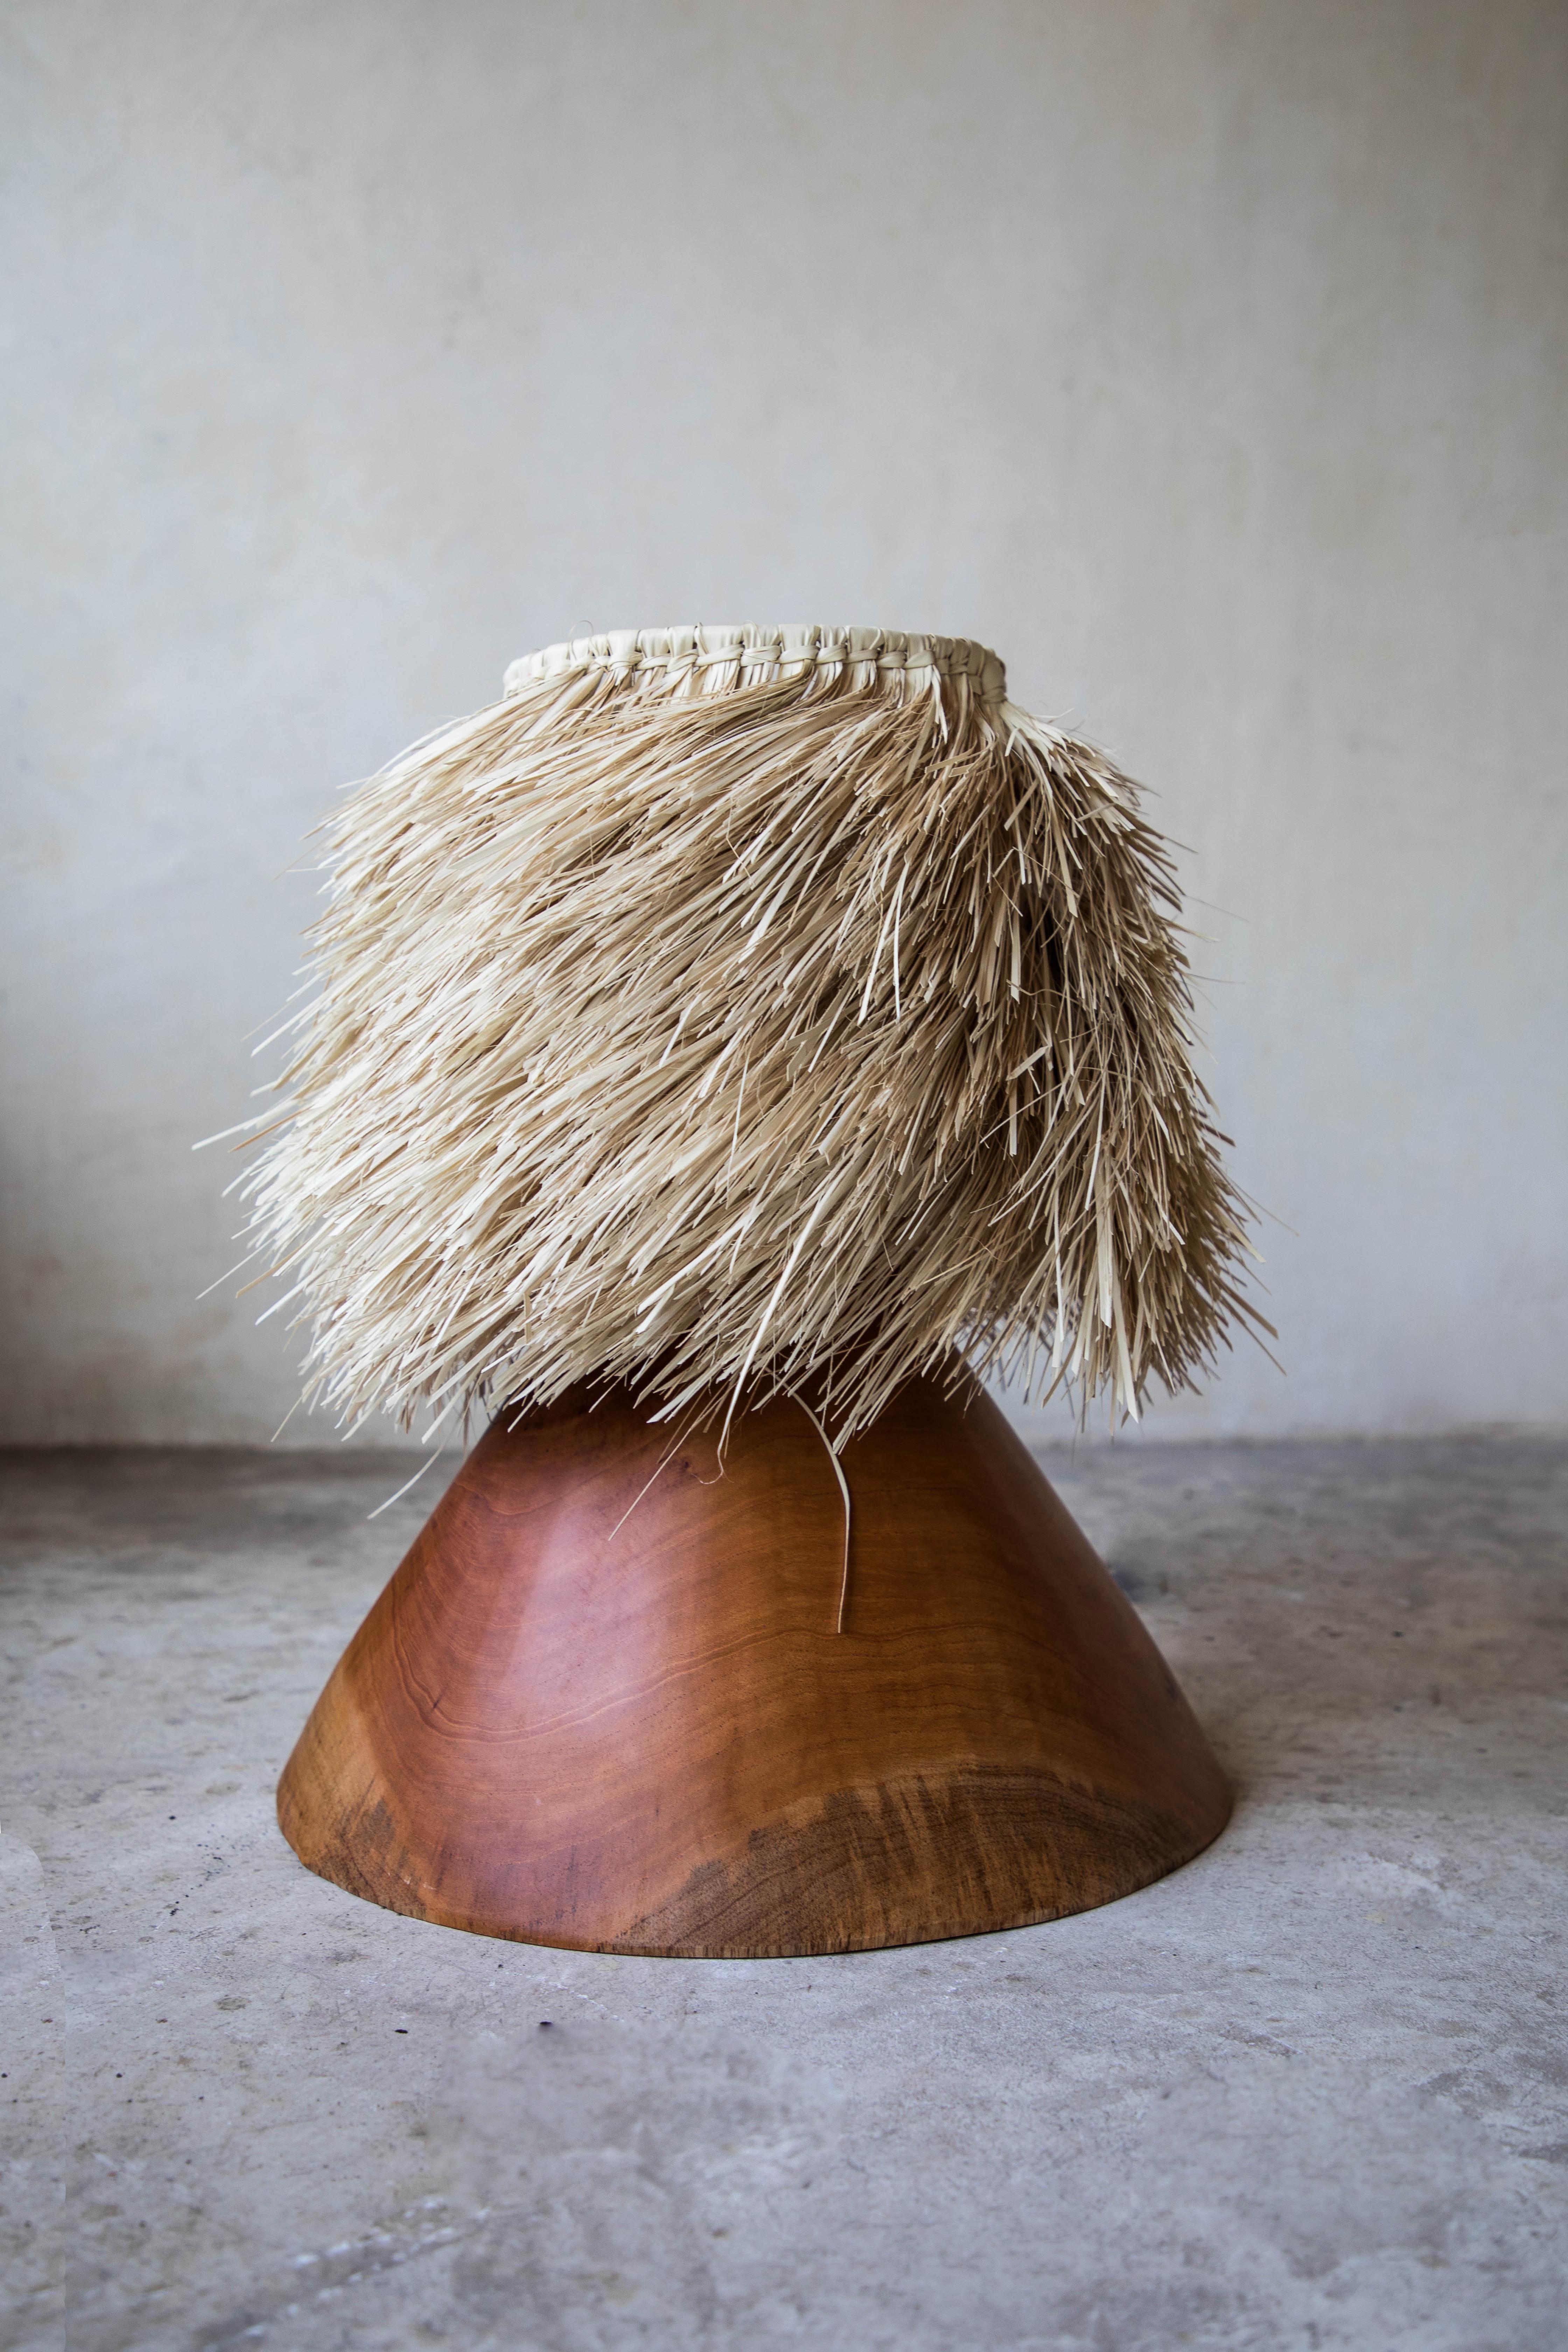 Original 08 cone table lamp with palm screen by Daniel Orozco
Material: Jabin wood.
Dimensions: D 39 x H 30 cm
Available with palm or linen lampshade.

Jabin wood cone table lamp, with palm or linen screen. Handmade by Mexican